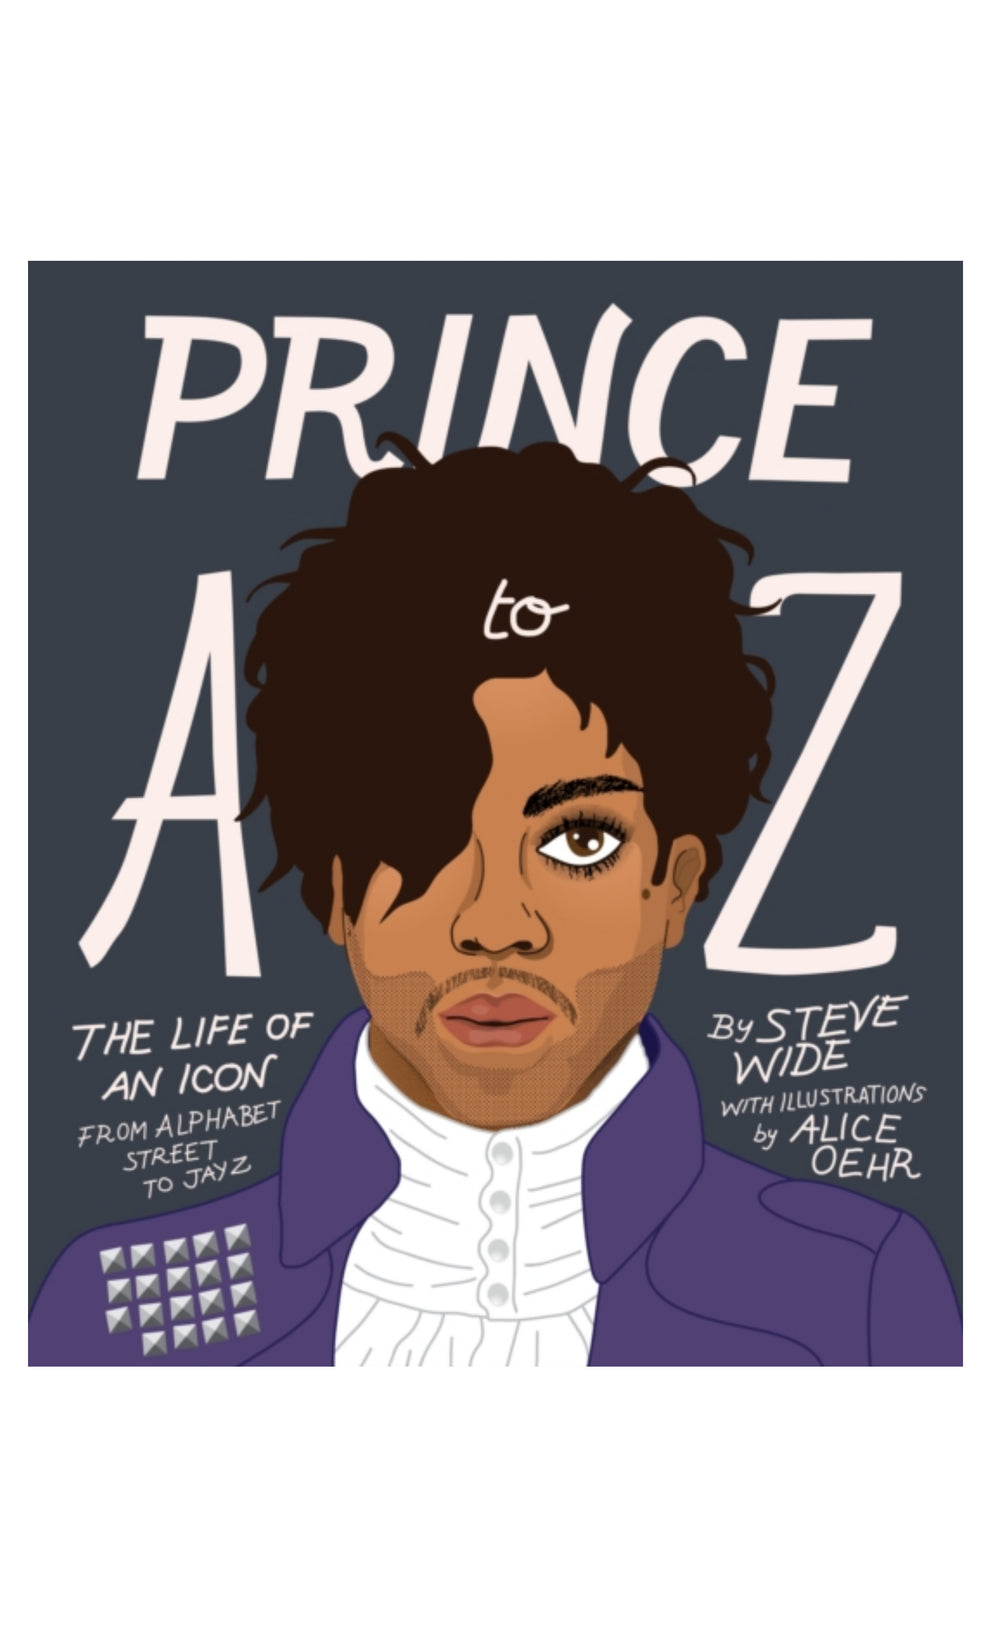 Prince – A to Z: The Life of an Icon From Alphabet Street to Jay Z by Steve Wide Hard Backed Book